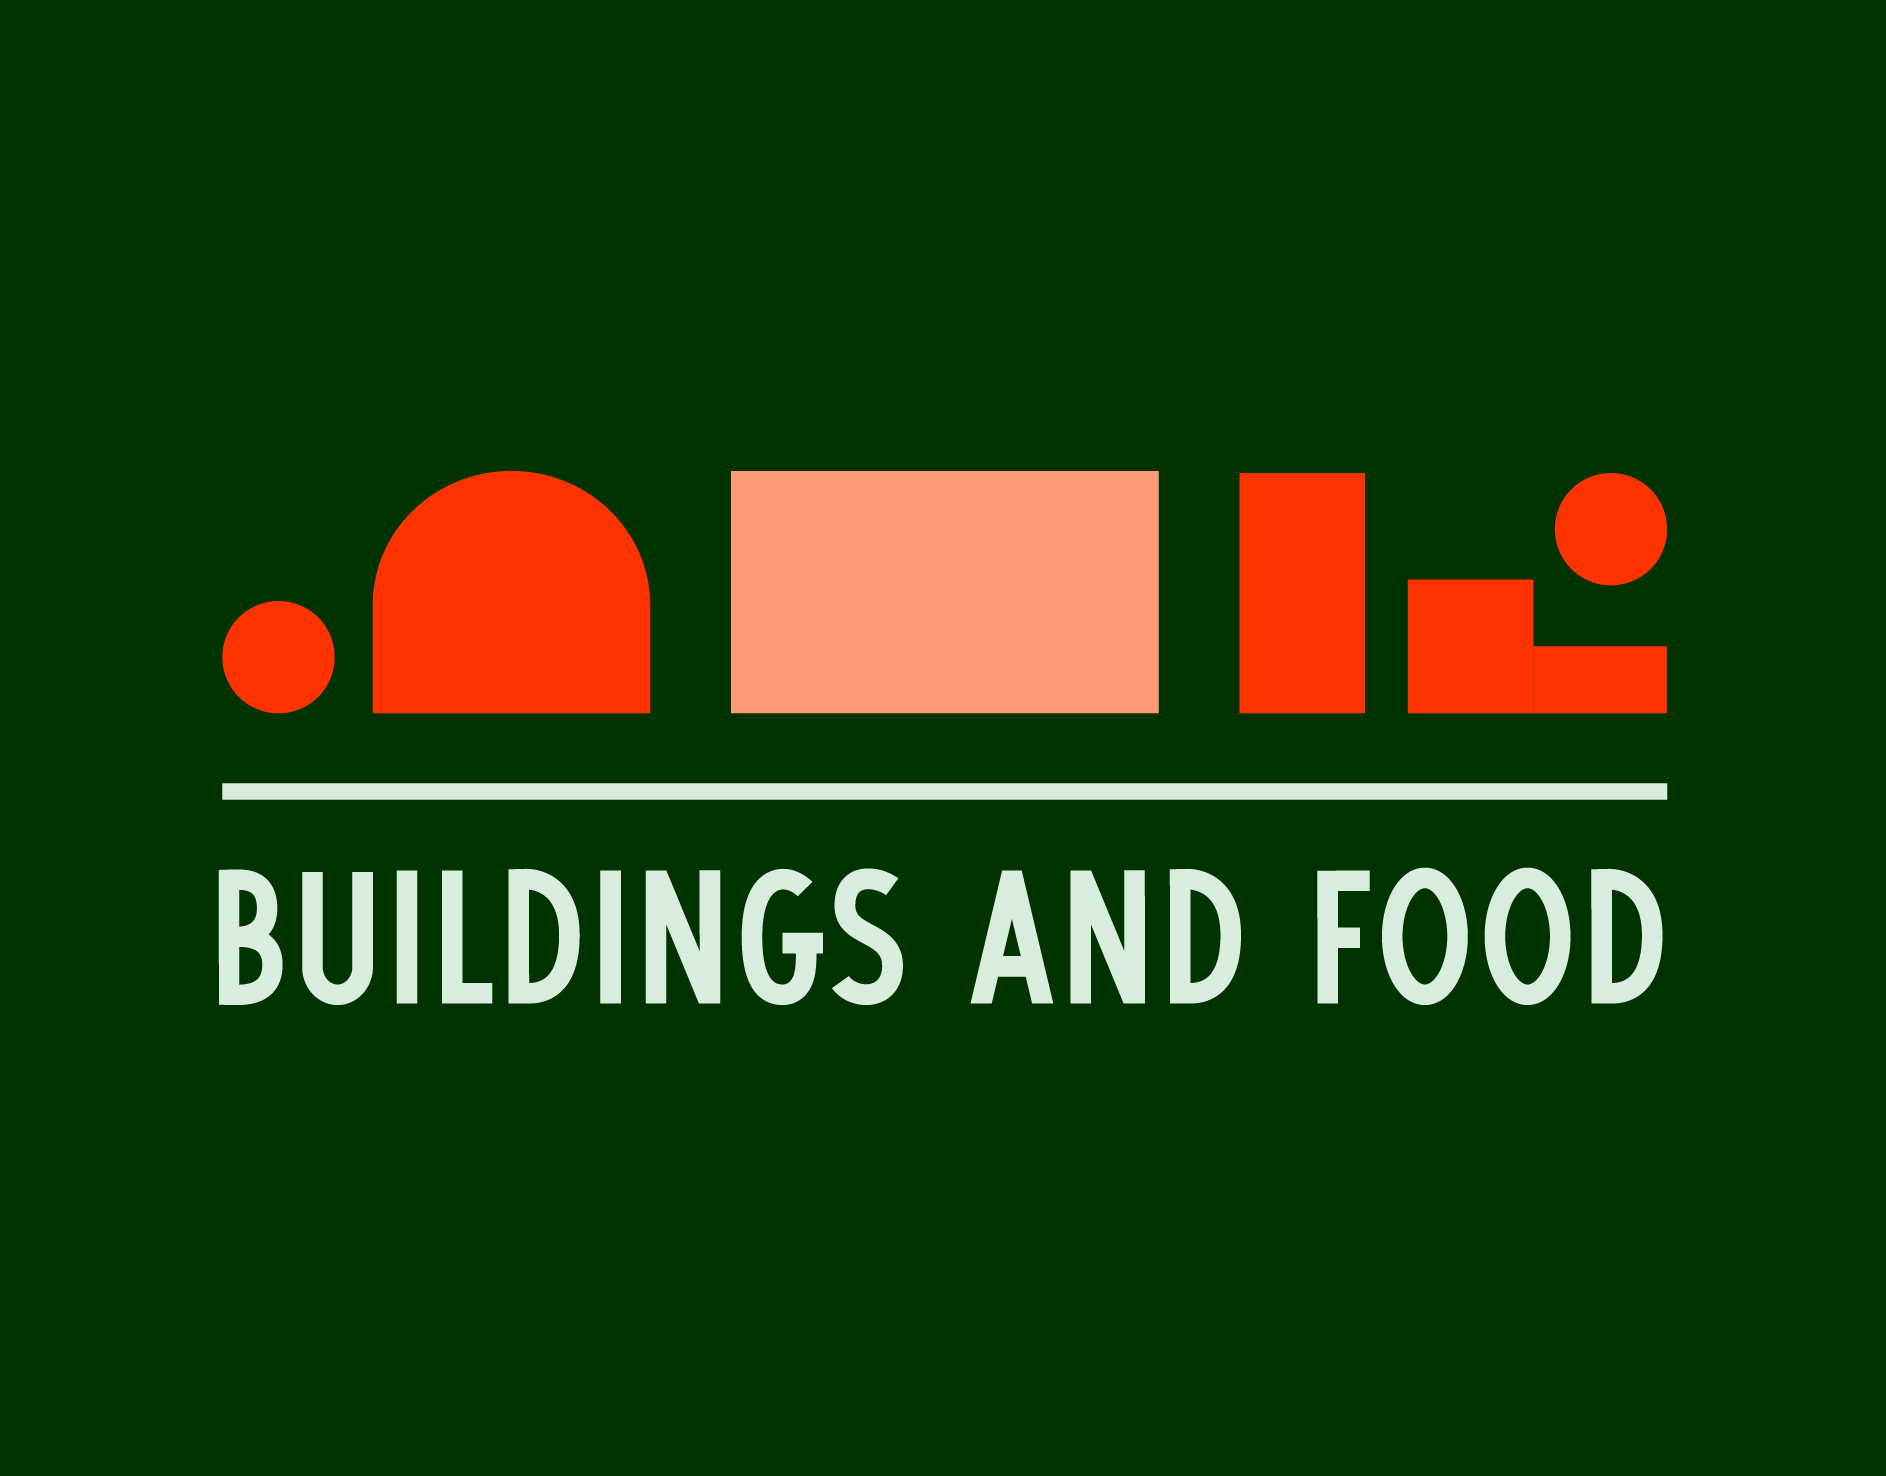 Buildings and Food | Branding. March 2022